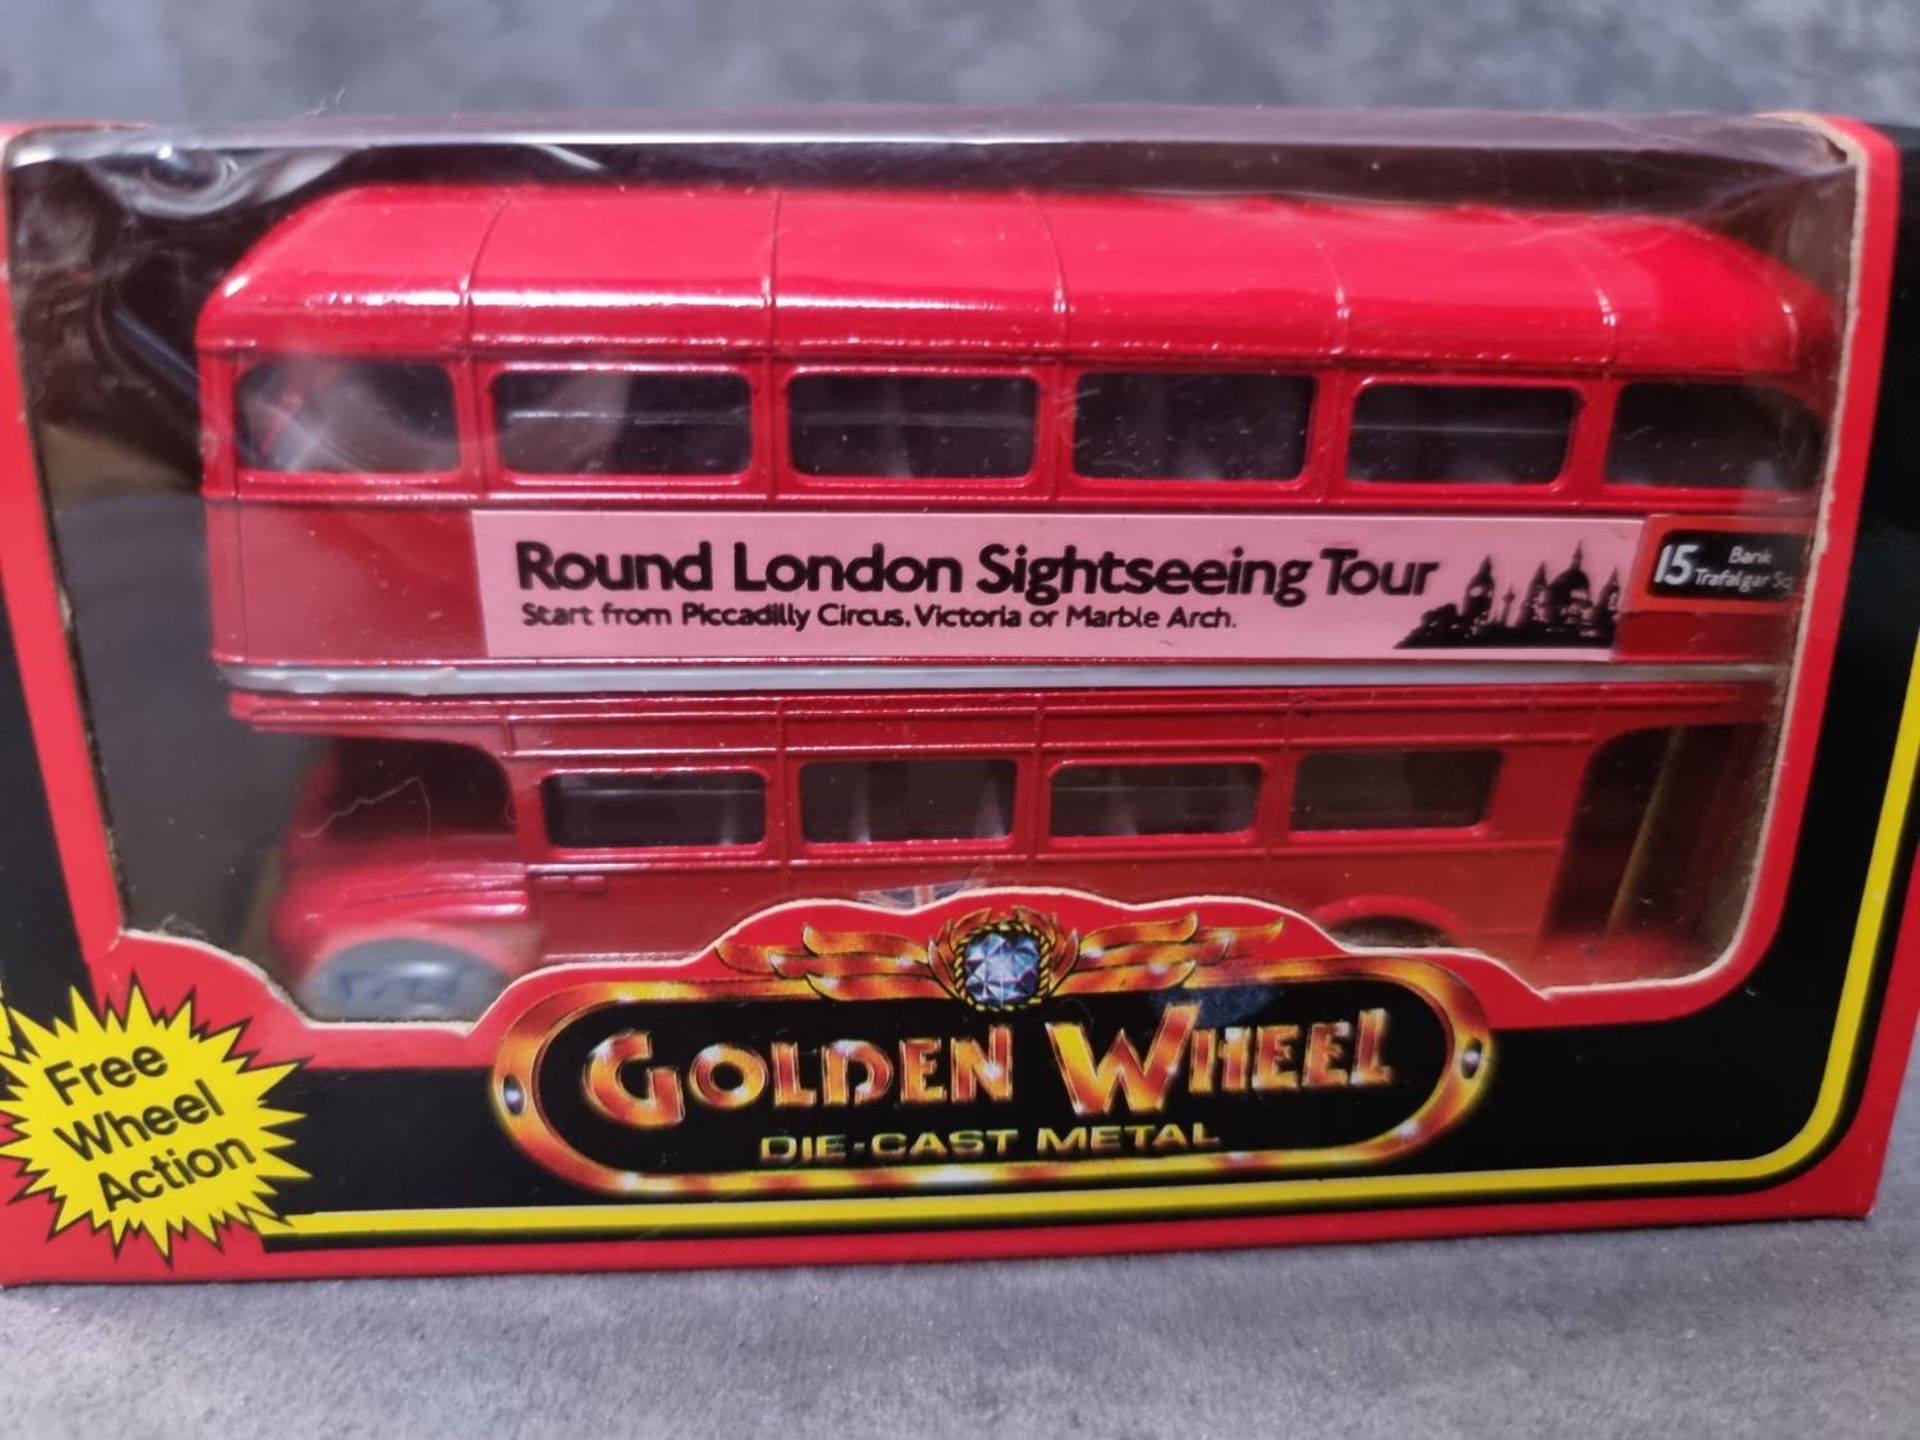 Golden Wheel Diecast Metal 1/43 Scale Round London Sightseeing Bus - Image 2 of 2